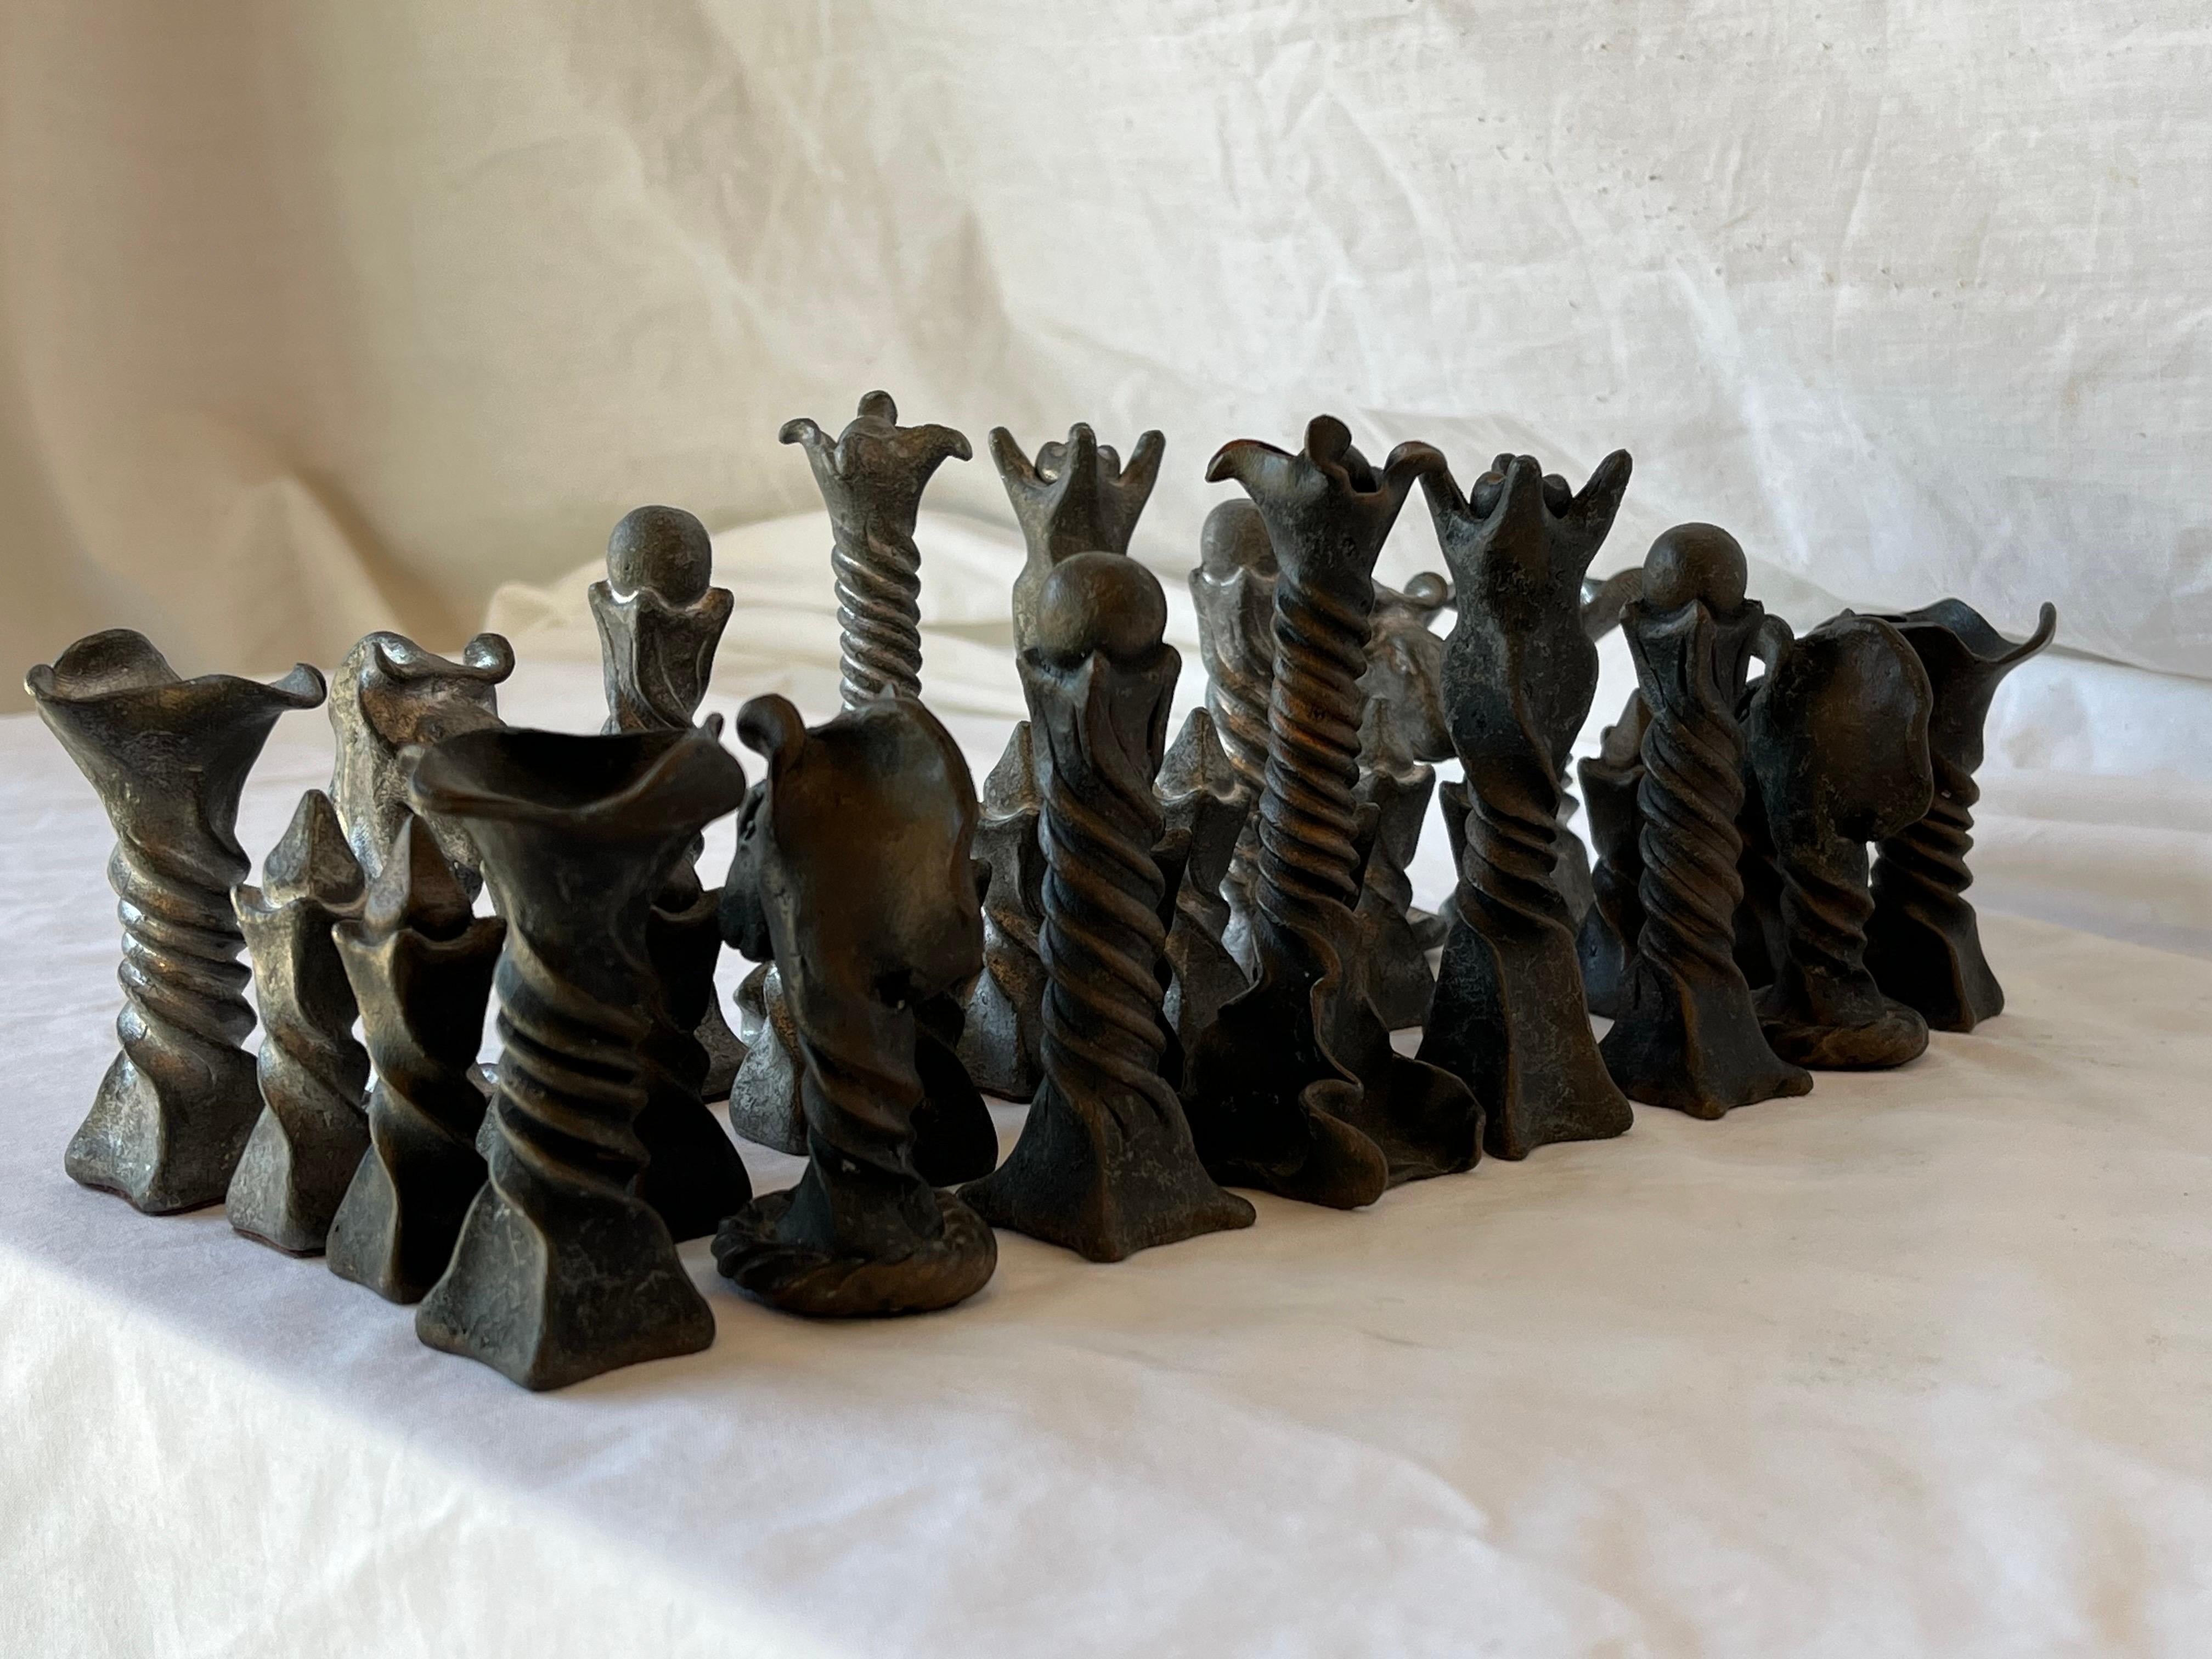 A vintage Brutalist style chess set in cast metal. The pieces feature a twisted and flanged design. Brutalism is a design movement characterized by form and texture - this set has both in spades. The twisted shafts of the pieces evoke movement while